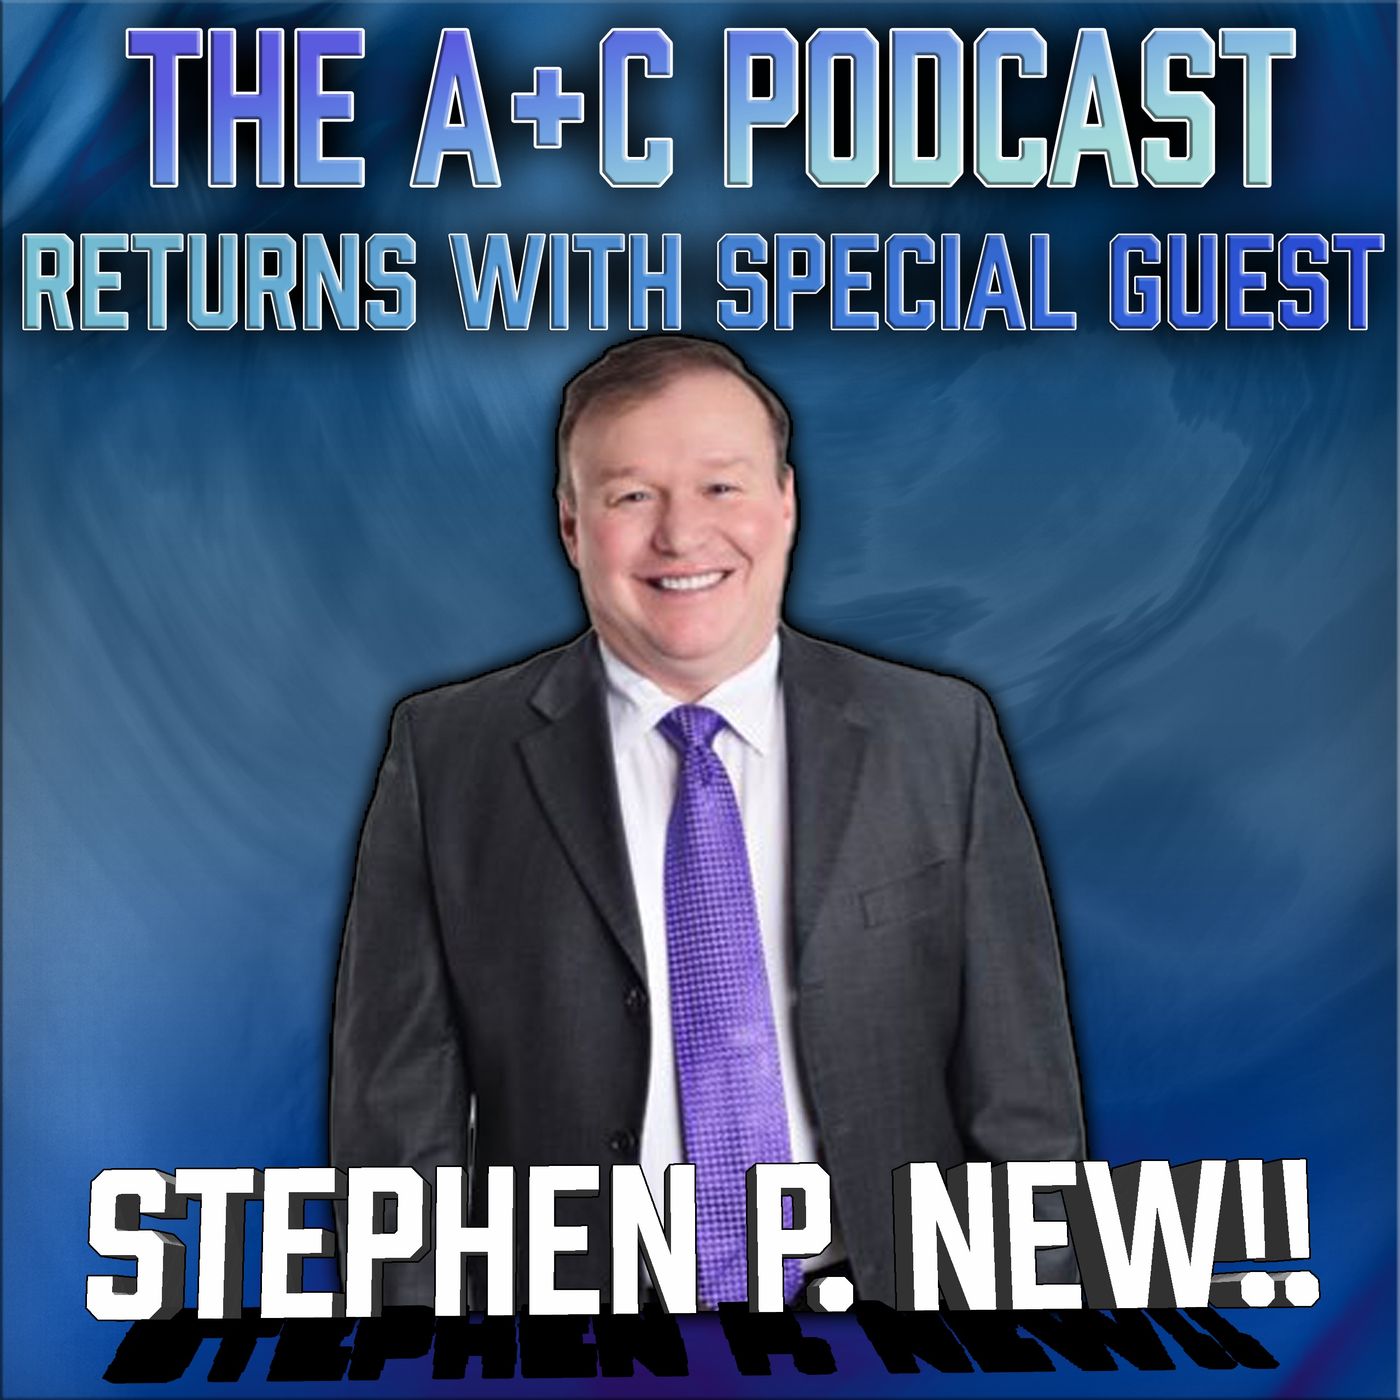 The Return Episode With Steven P New!!!